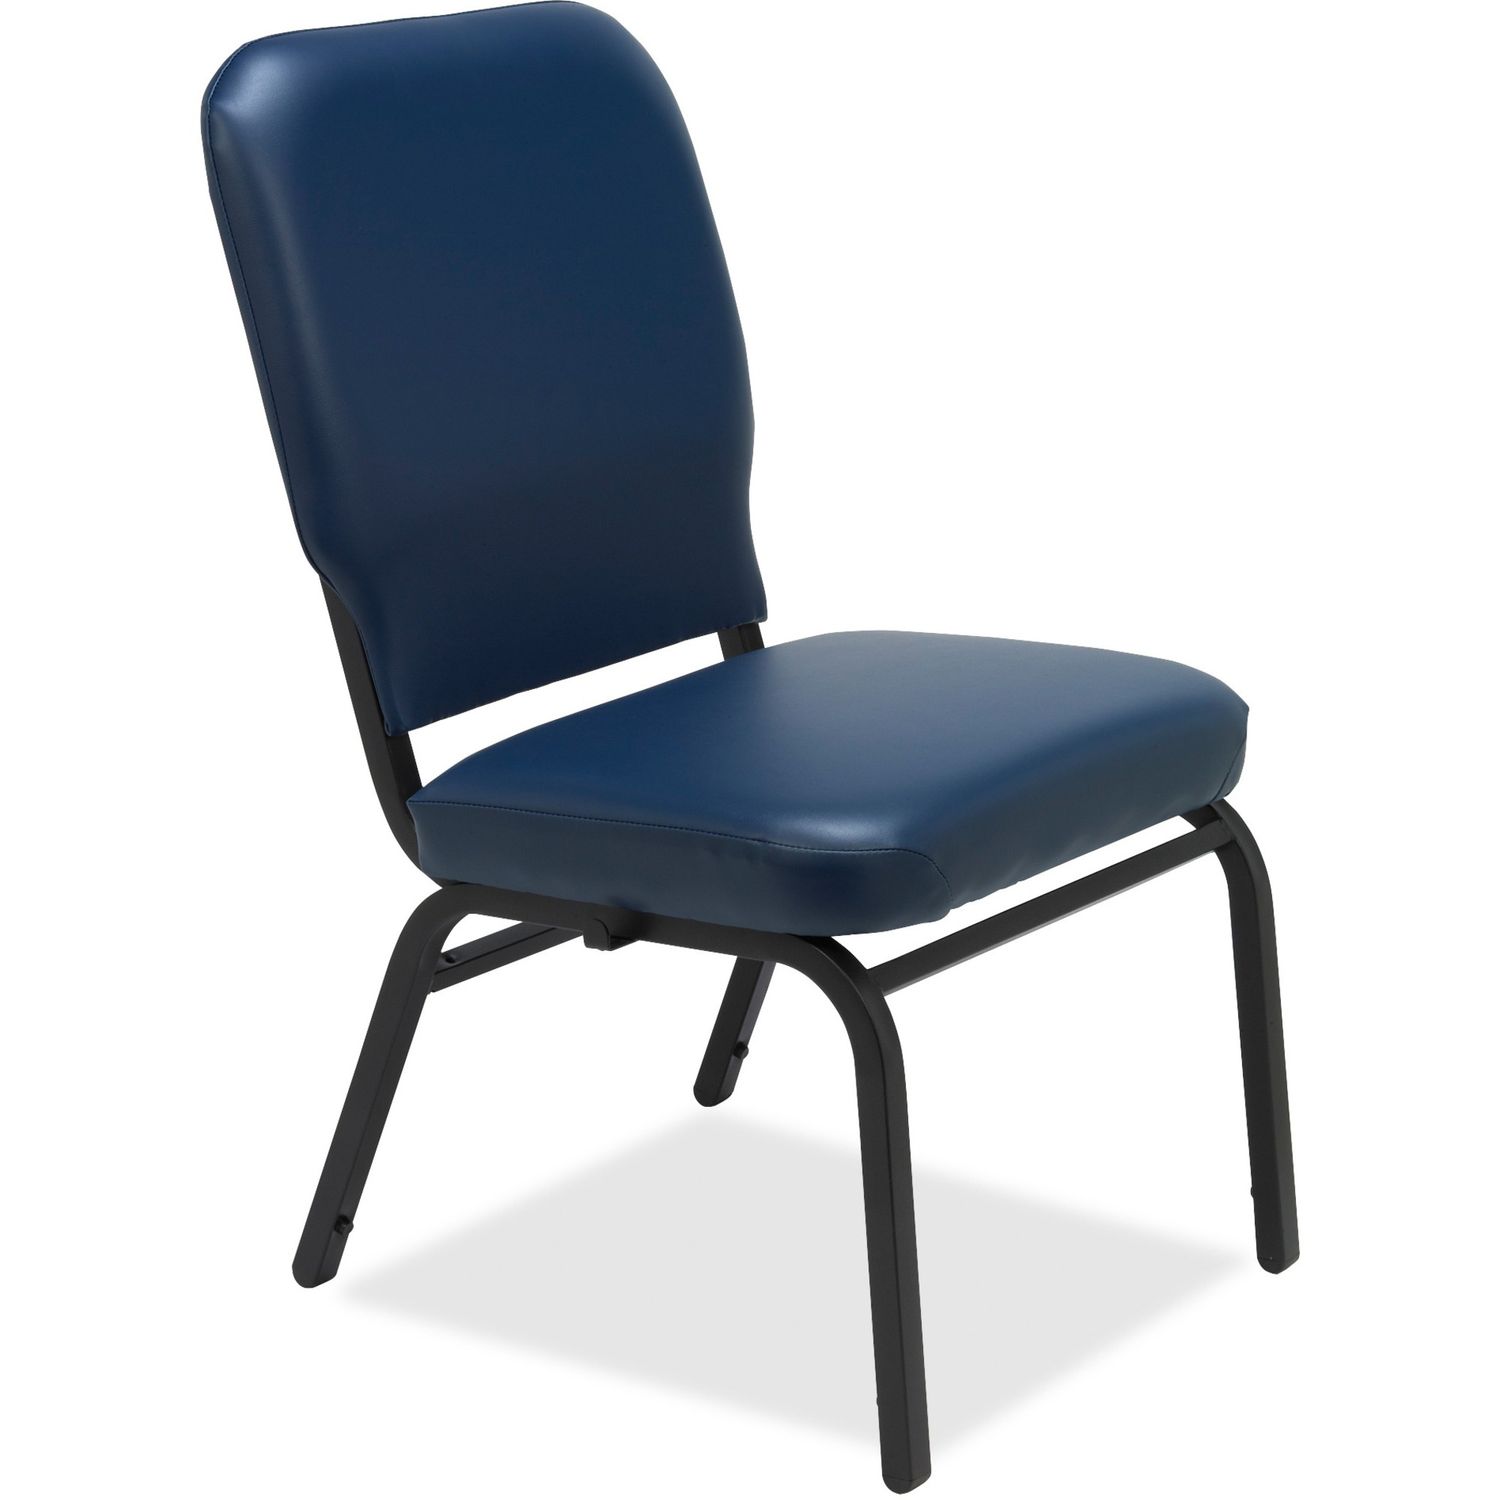 Vinyl Back/Seat Oversized Stack Chairs Navy Vinyl Seat, Navy Vinyl Back, Steel Frame, Four-legged Base, 2 / Carton